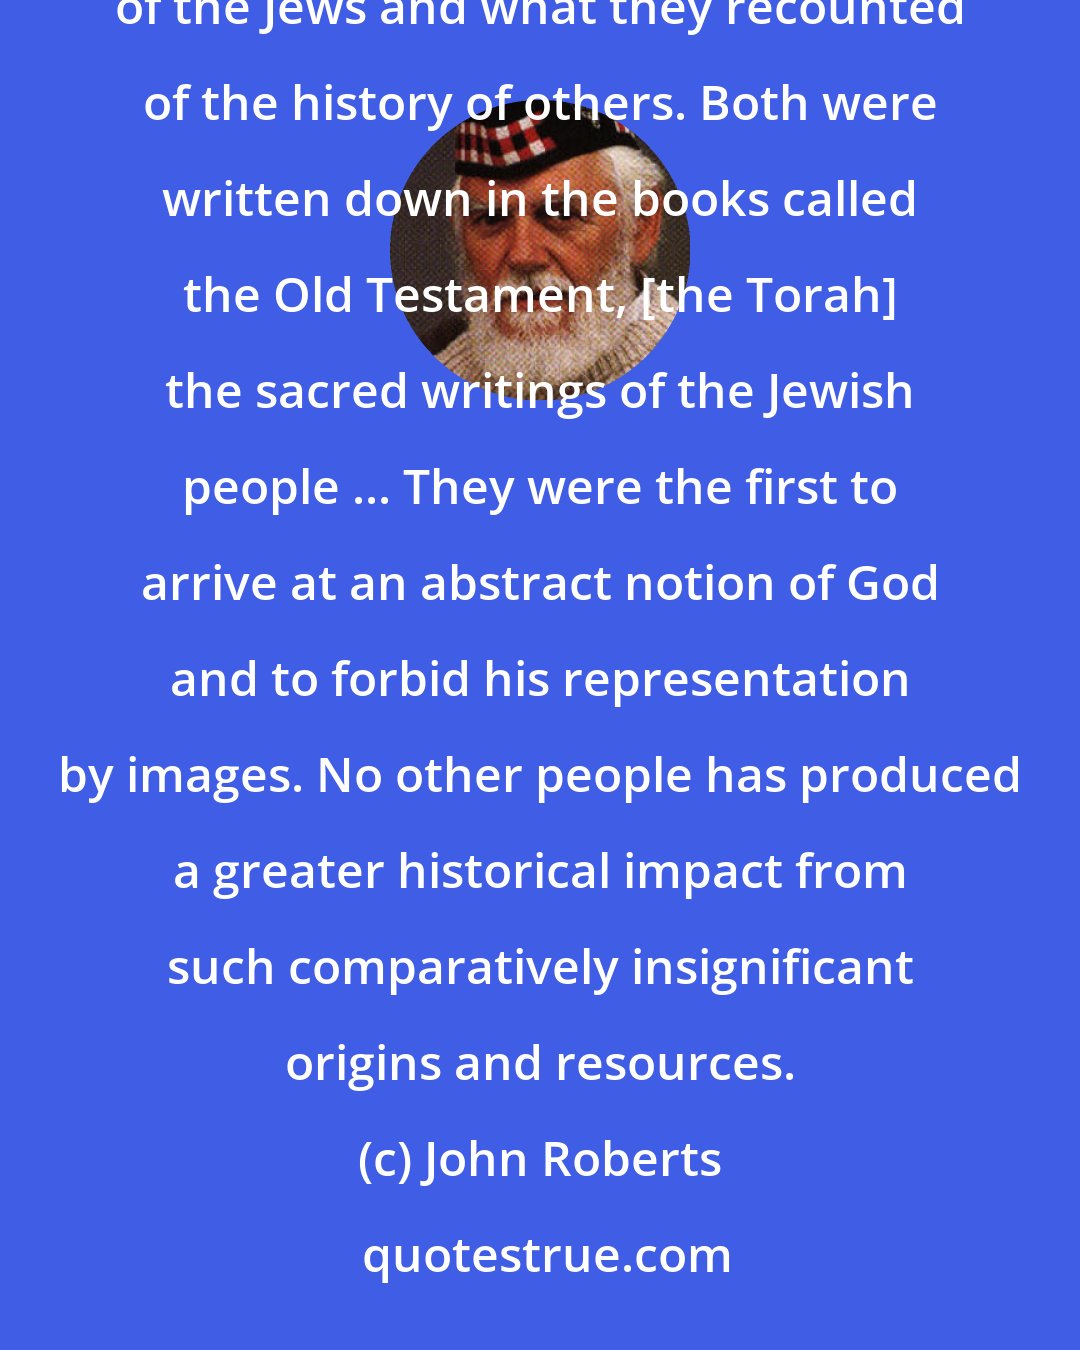 John Roberts: For many people during many centuries, mankind's history before the coming of Christianity was the history of the Jews and what they recounted of the history of others. Both were written down in the books called the Old Testament, [the Torah] the sacred writings of the Jewish people ... They were the first to arrive at an abstract notion of God and to forbid his representation by images. No other people has produced a greater historical impact from such comparatively insignificant origins and resources.